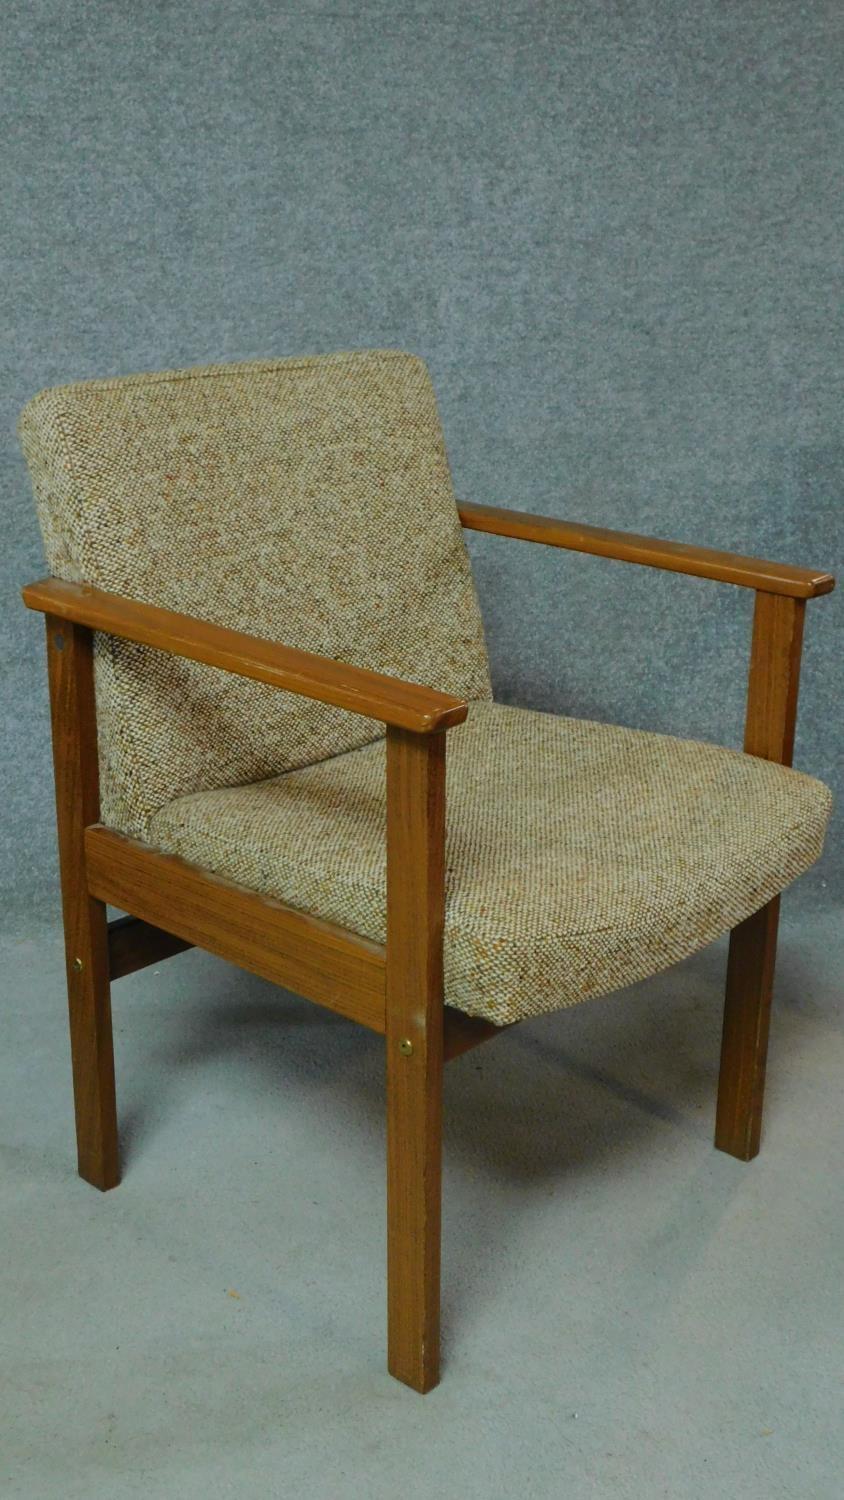 Three vintage teak armchairs with beige upholstery, by Antocks Lairn. H.80cm - Image 2 of 5